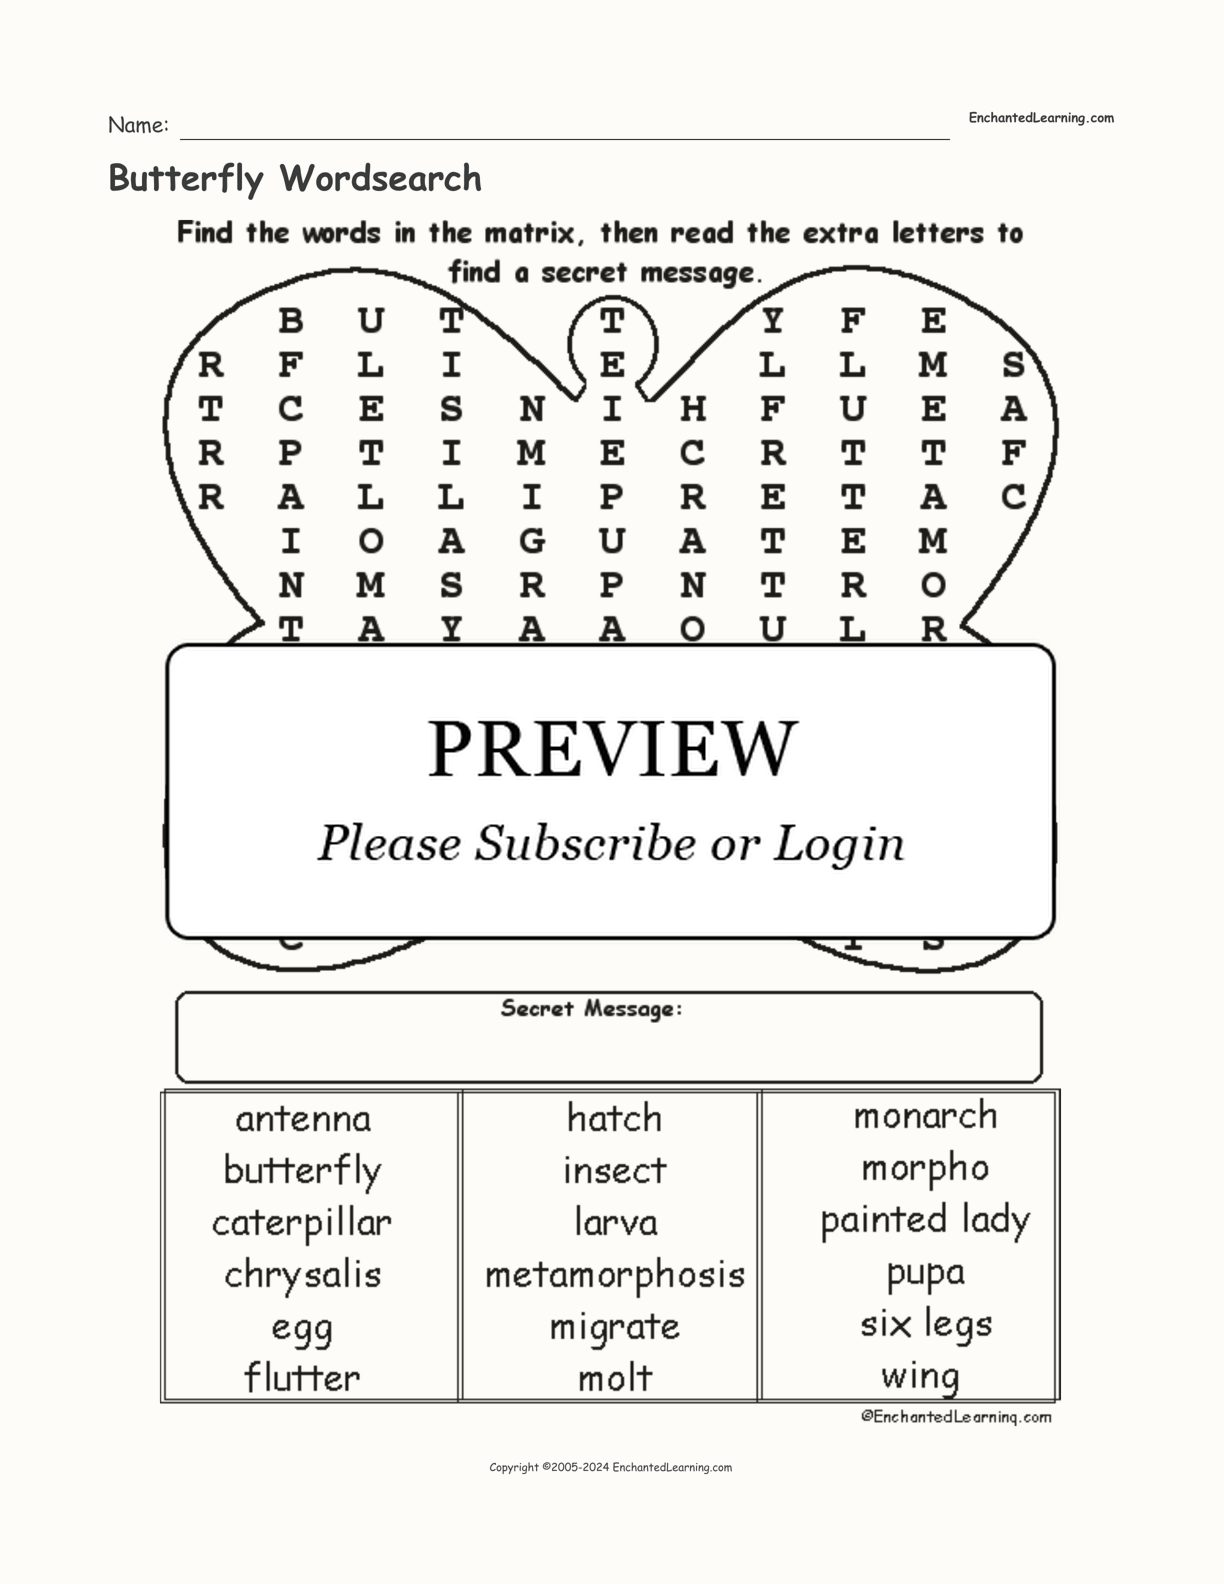 Butterfly Wordsearch interactive worksheet page 1